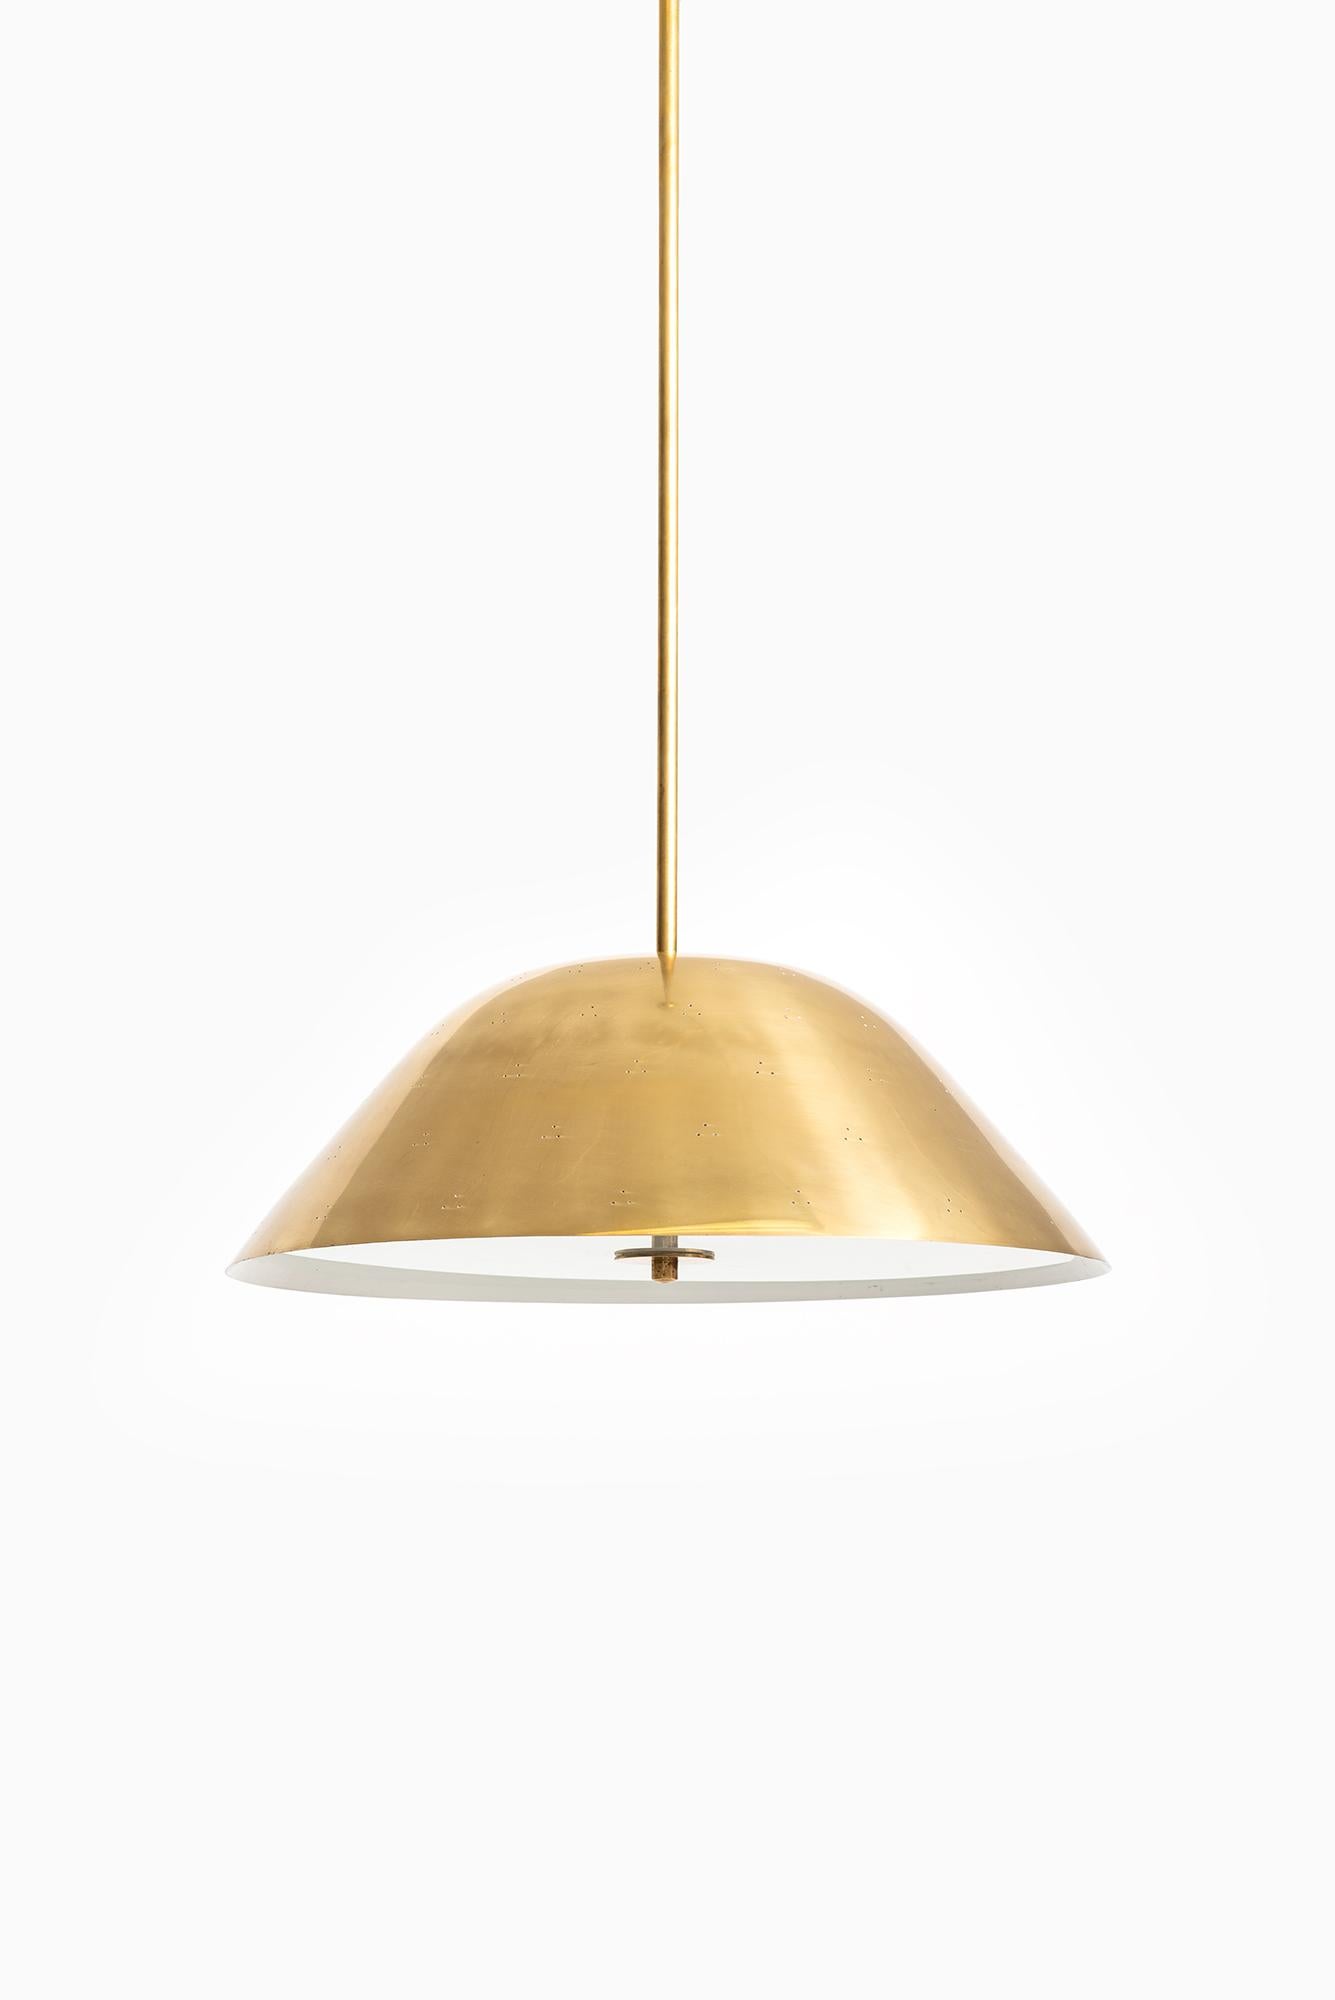 Scandinavian Modern Paavo Tynell Ceiling Lamp by Taito in Finland